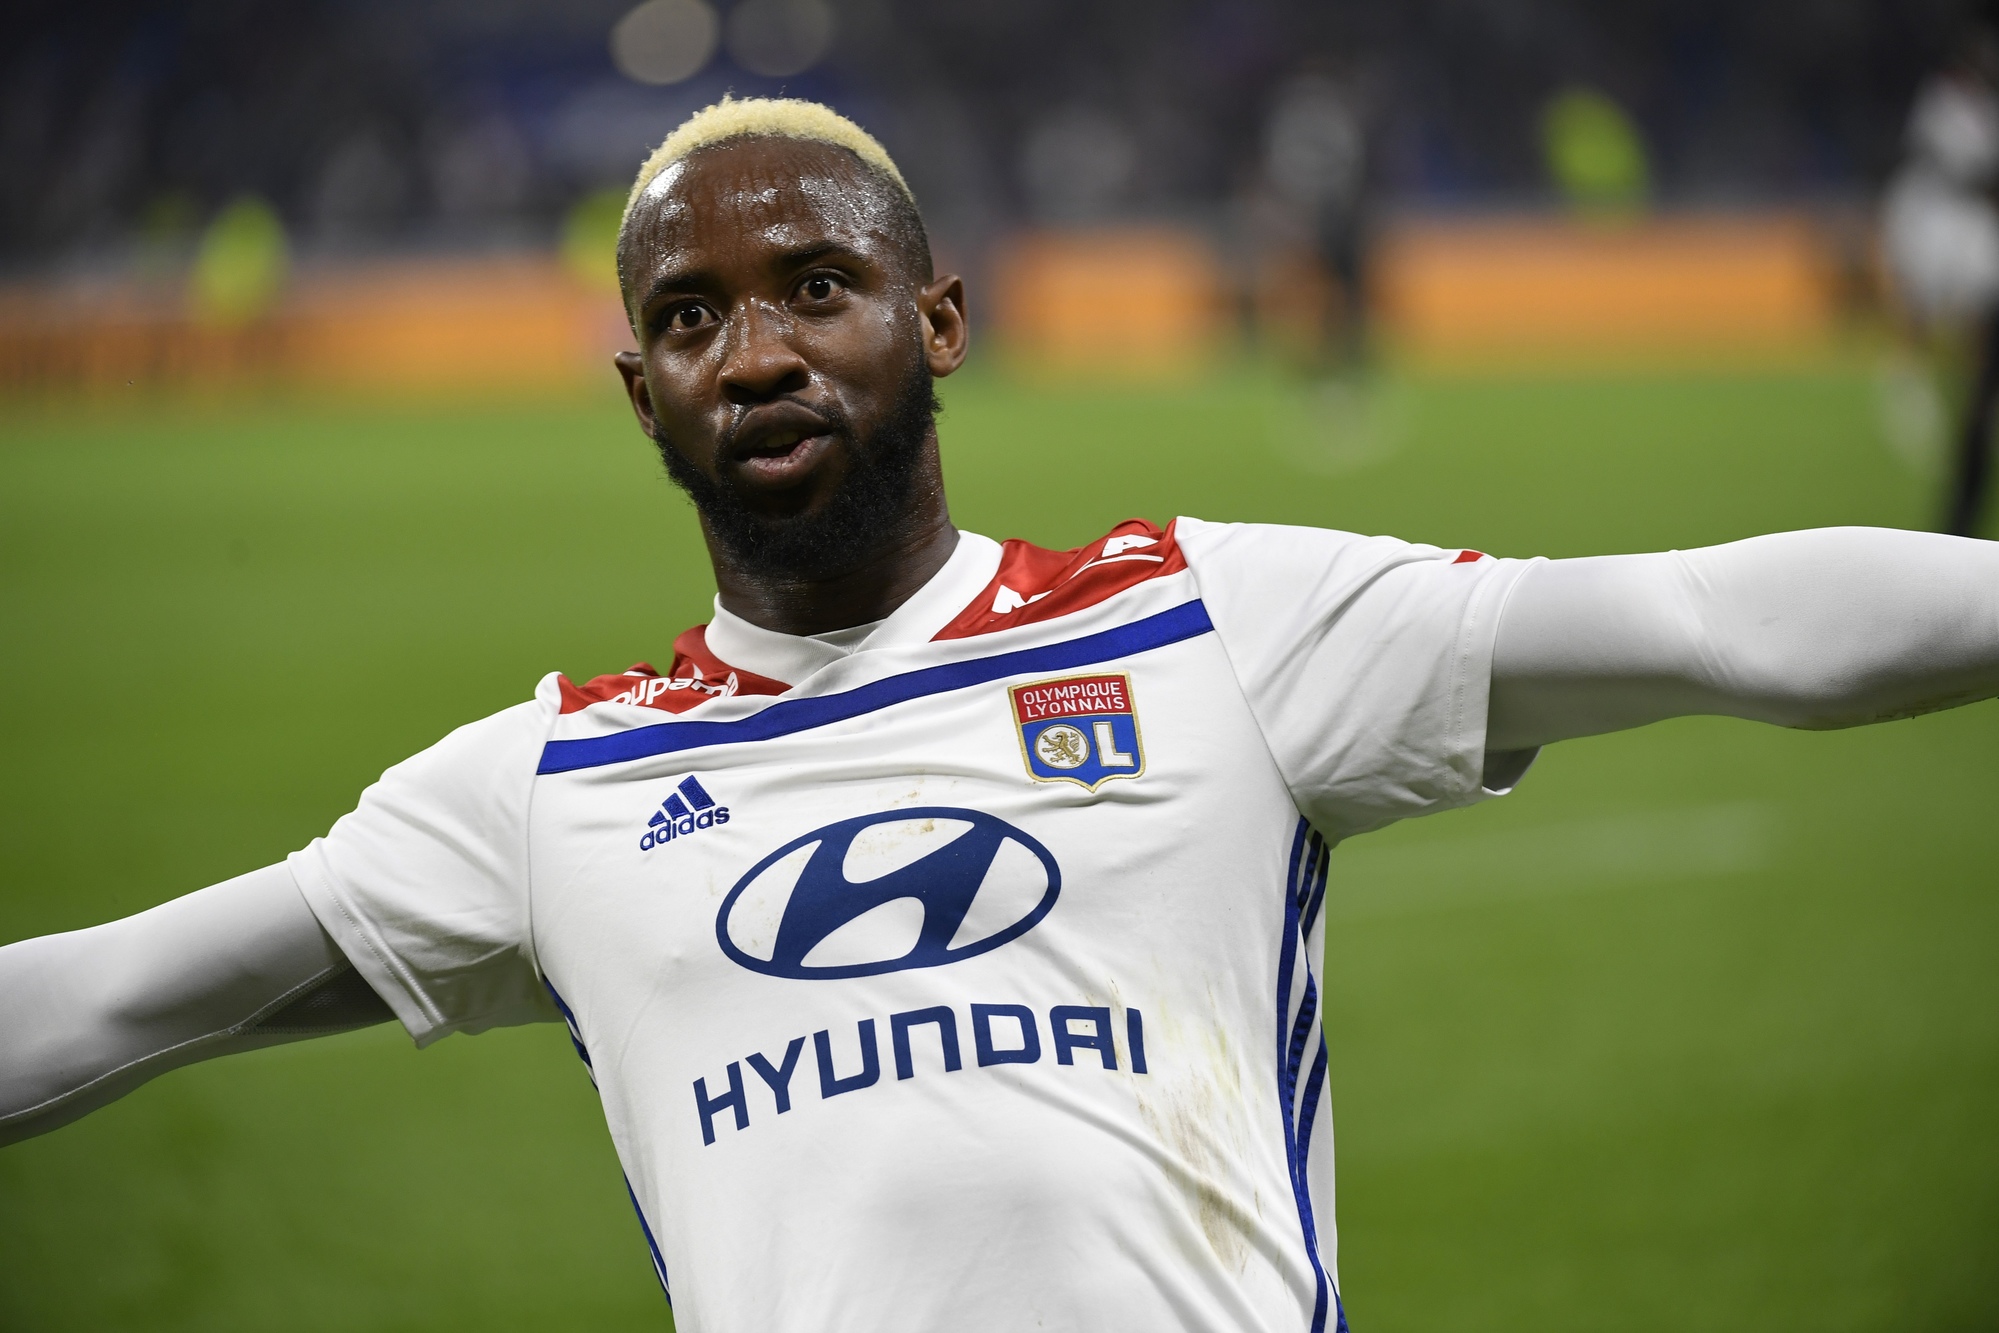 Lyon's French forward Moussa Dembele reacts after scoring a goal during the French L1 football match between Olympique Lyonnais and Nimes Olympique on Octobre 19, 2018, at the Groupama Stadium in Decines-Charpieu, near Lyon, central-eastern France. (Photo by PHILIPPE DESMAZES / AFP)